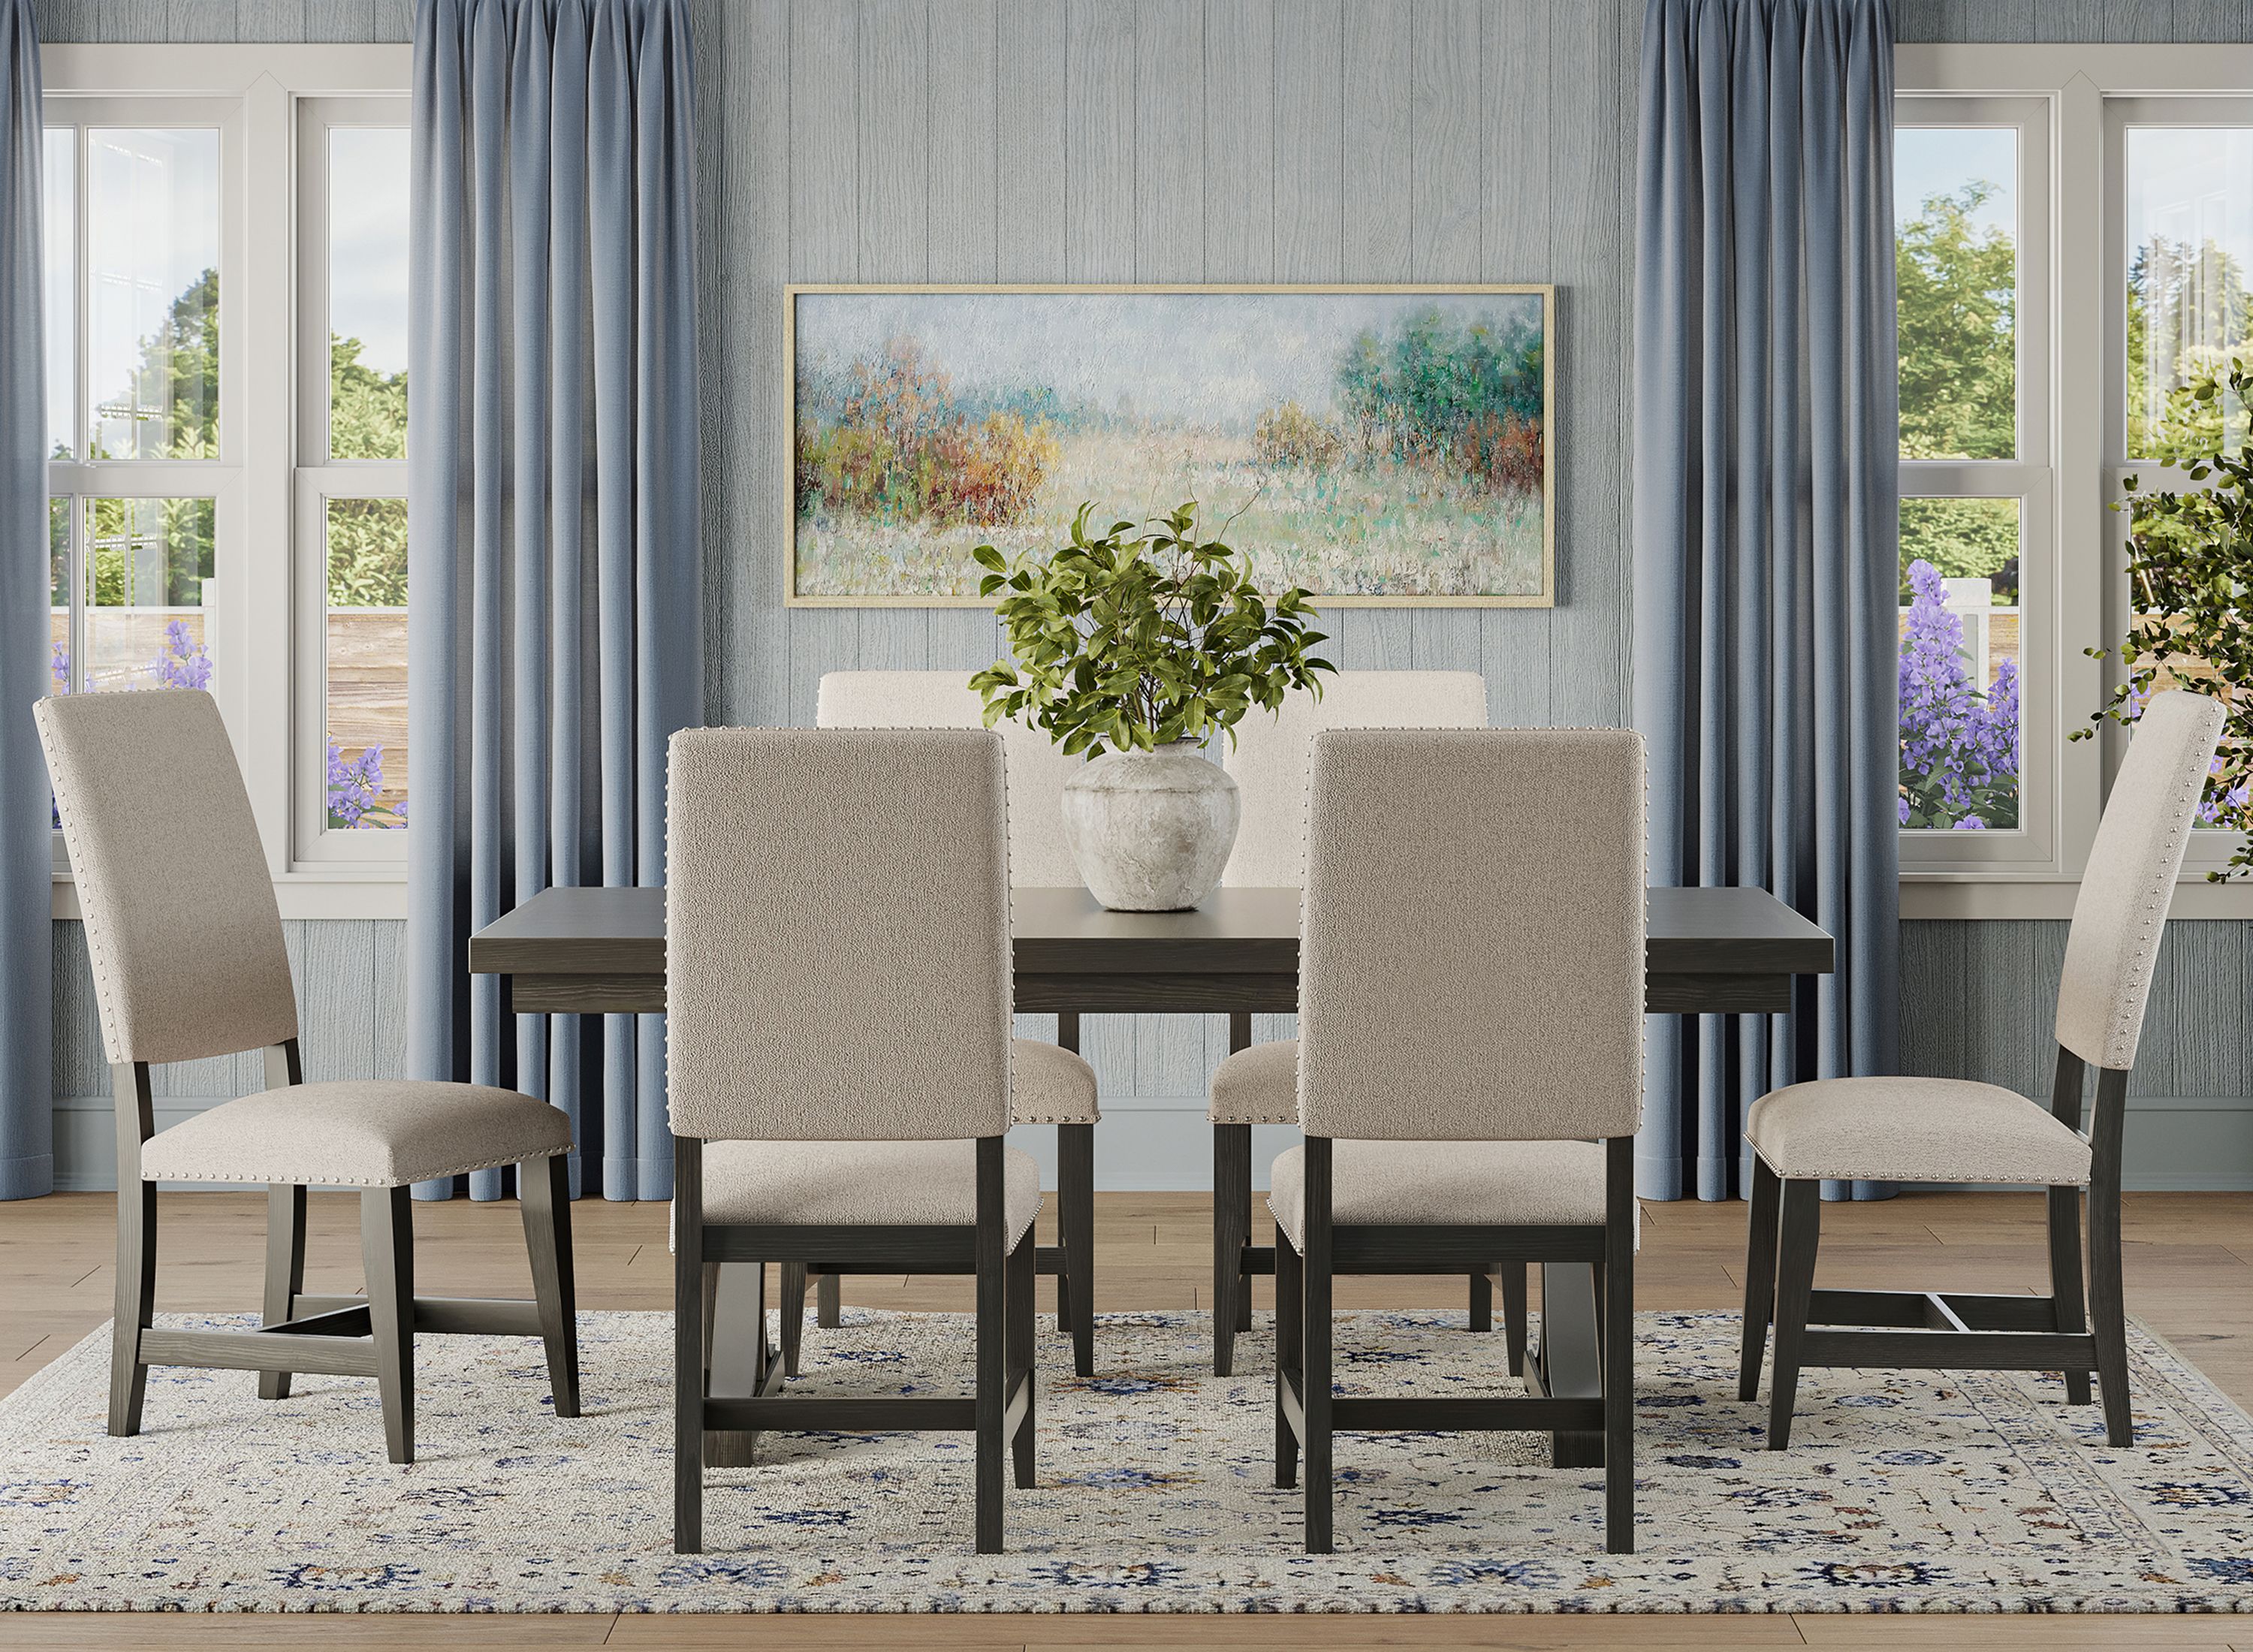 Raymour And Flanigan Outlet Dining Room Sets - Rafdrf50 Ideas Here